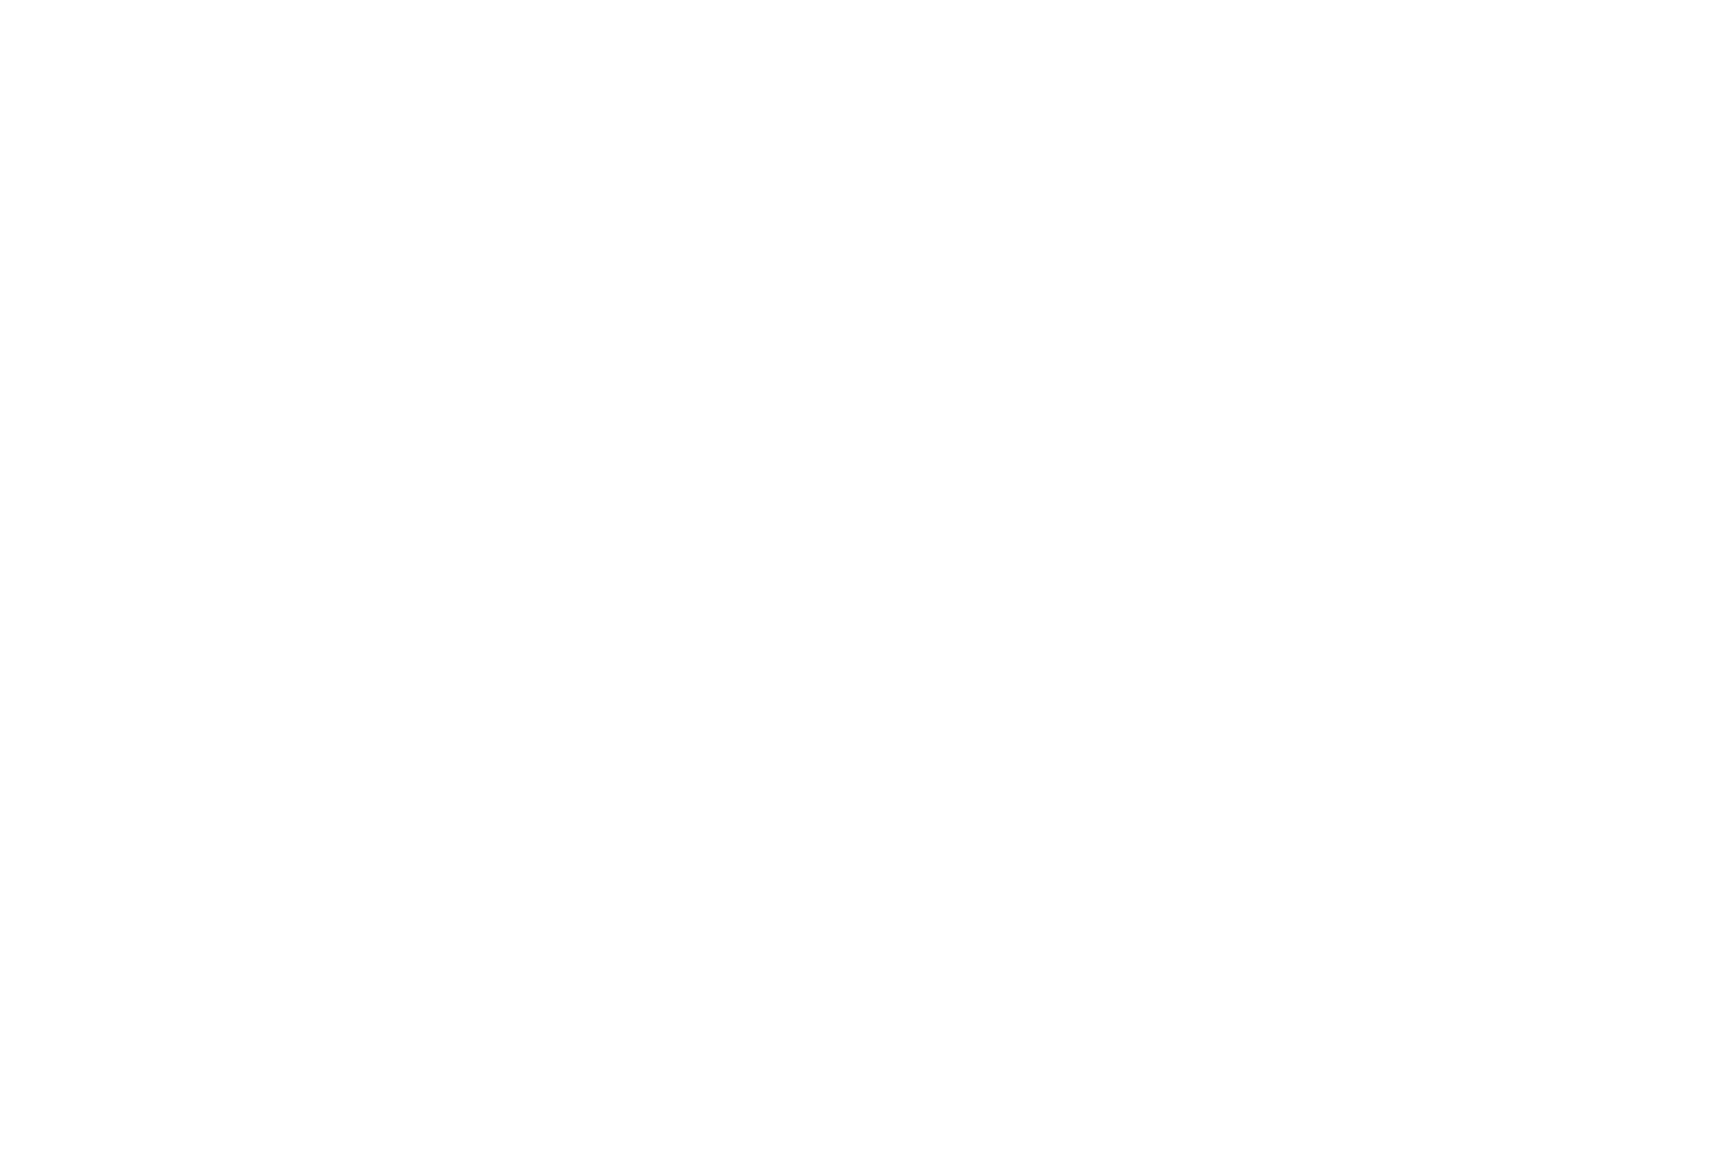 NOMINEE A Royal Chance Film Festival 2024 white